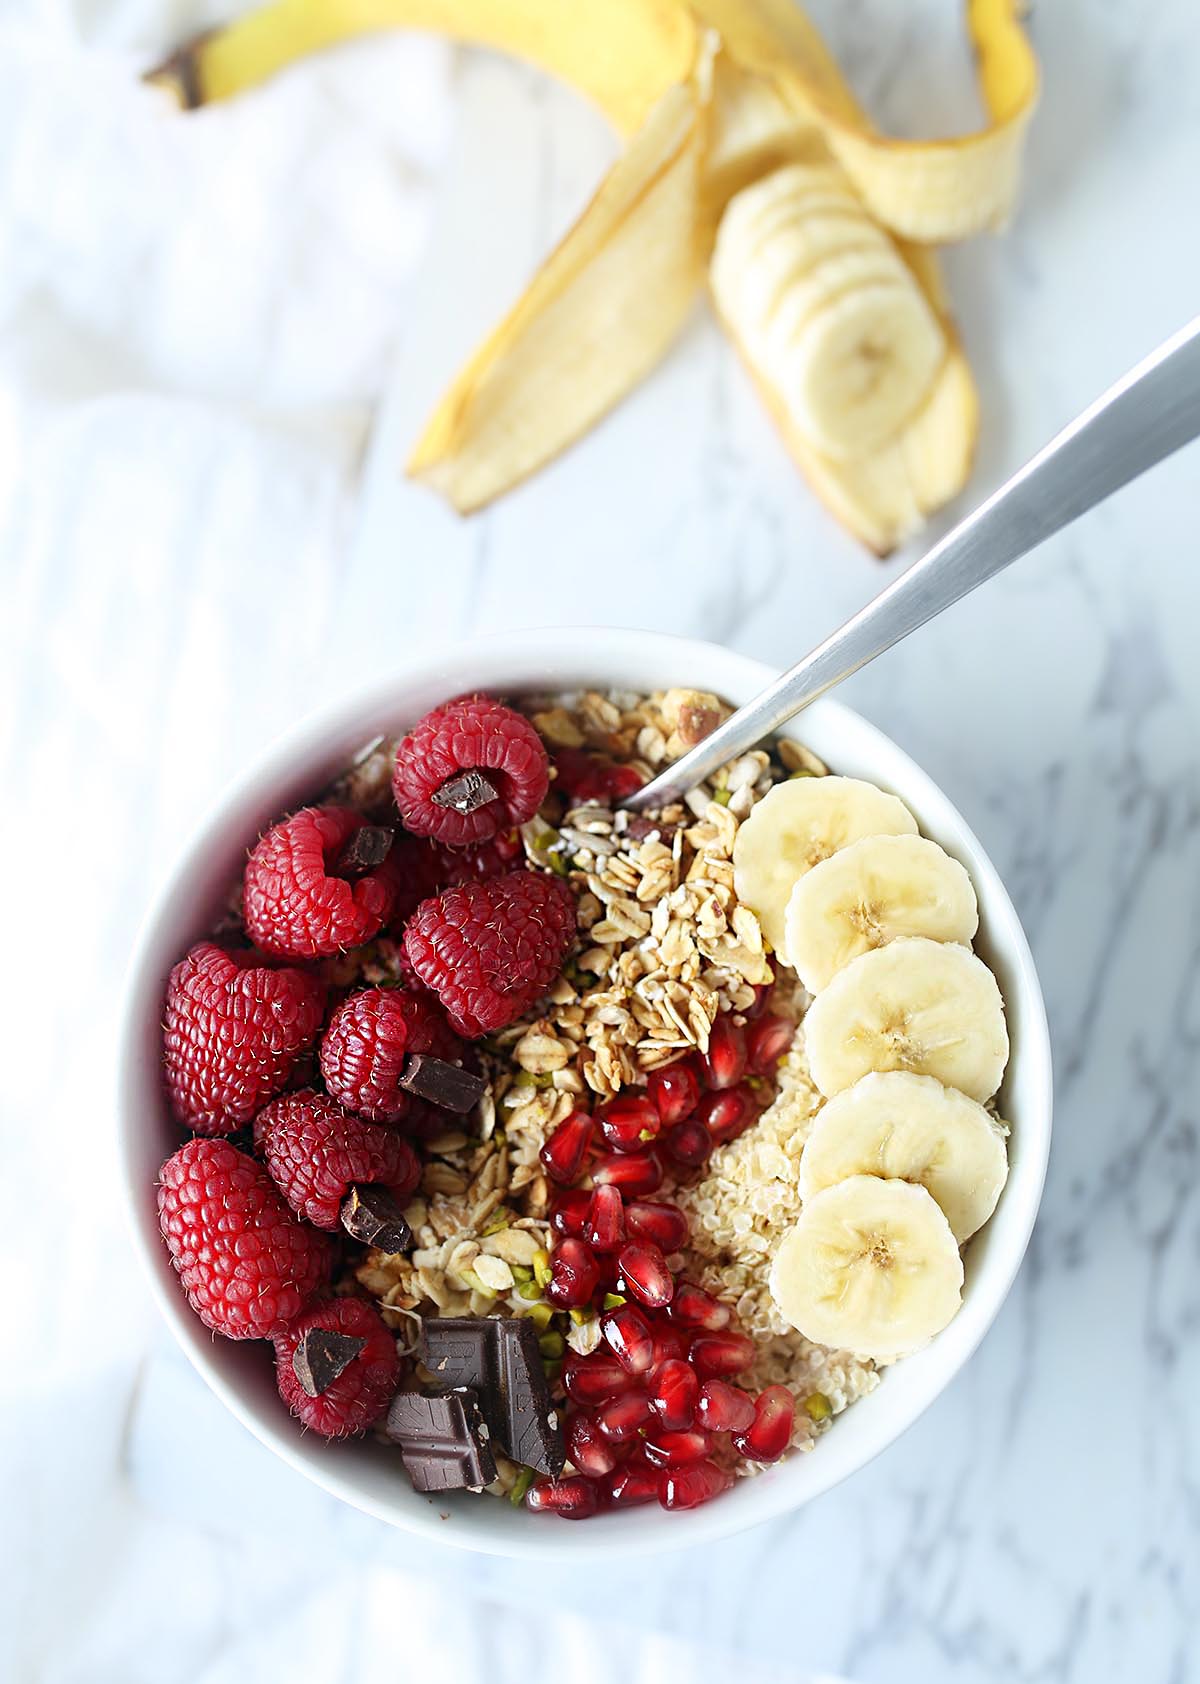 Overnight oatmeal with 20g of plant-based protein